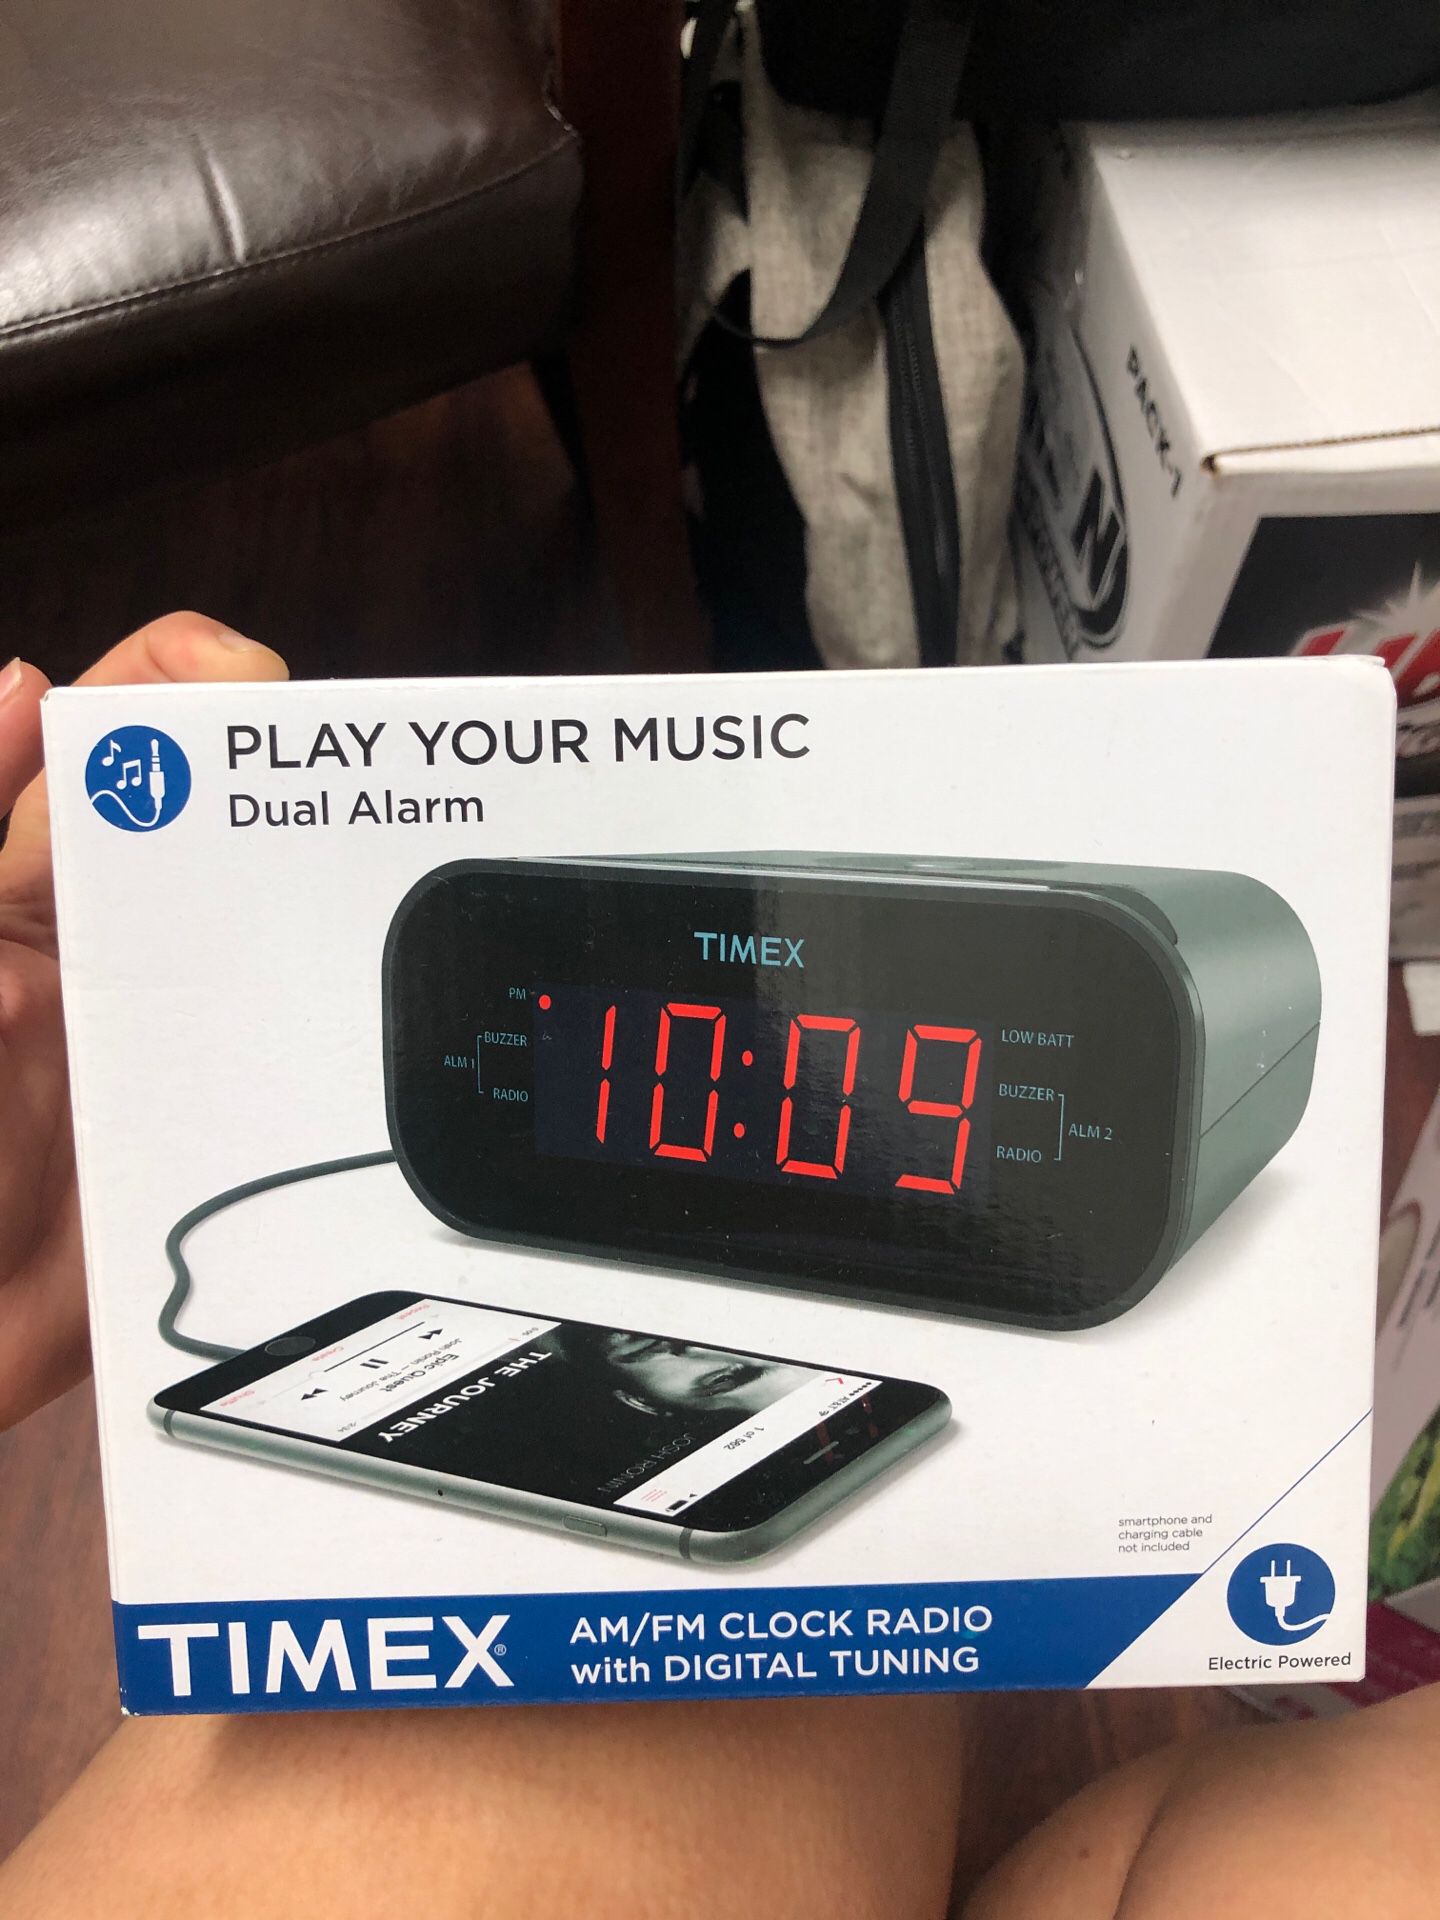 Timex play your music dual alarm